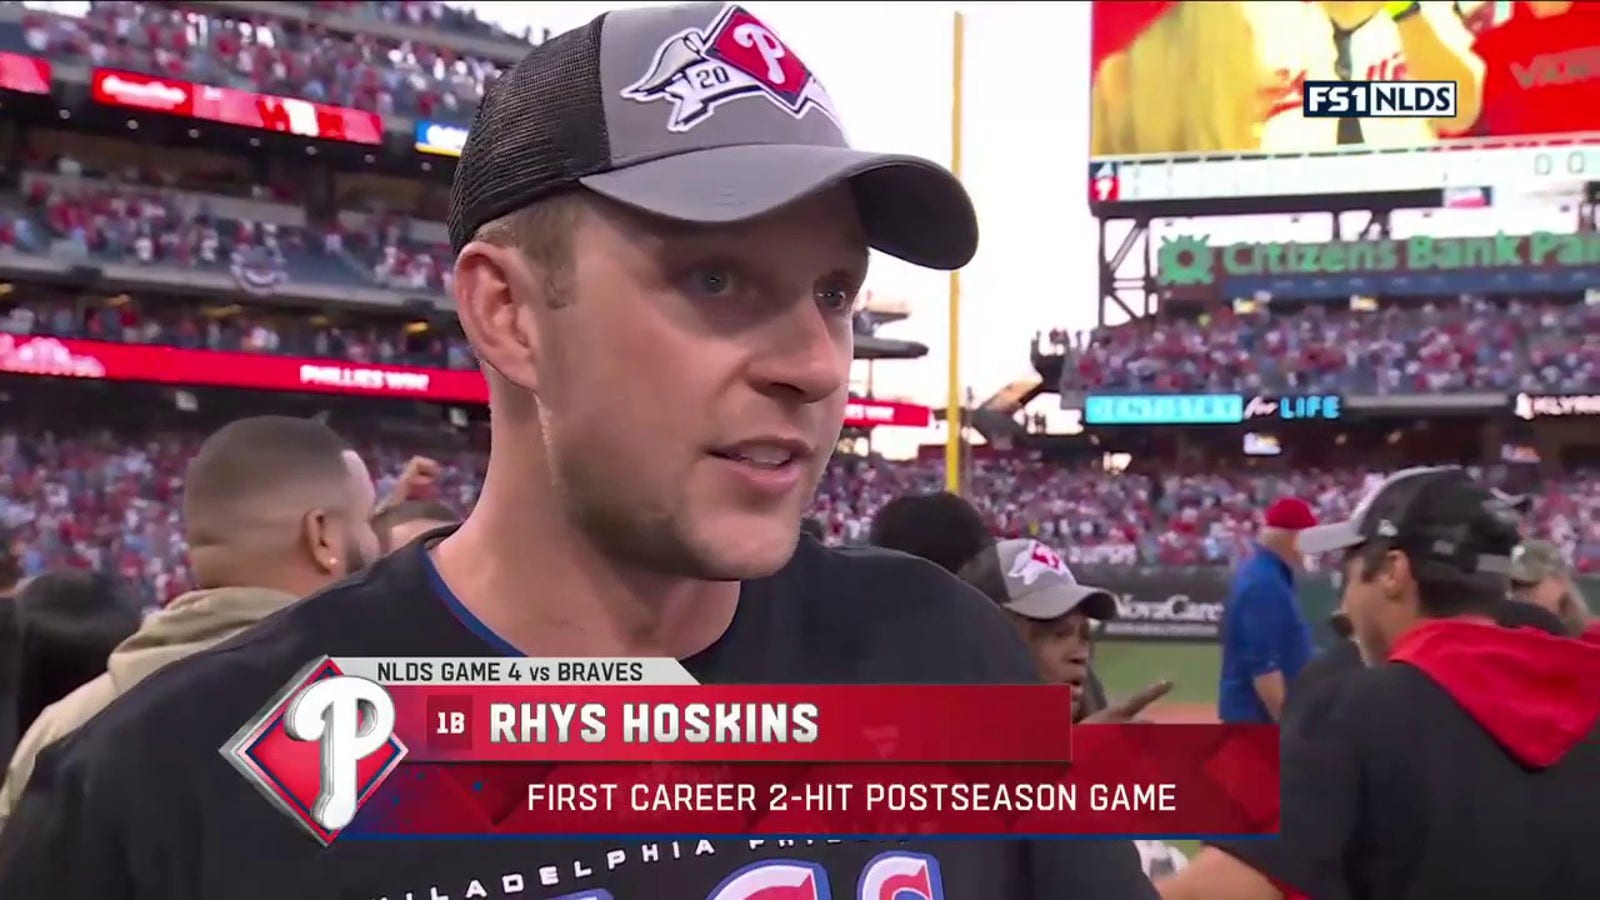 'You can see how much fun we're having' - Rhys Hoskins on Phillies